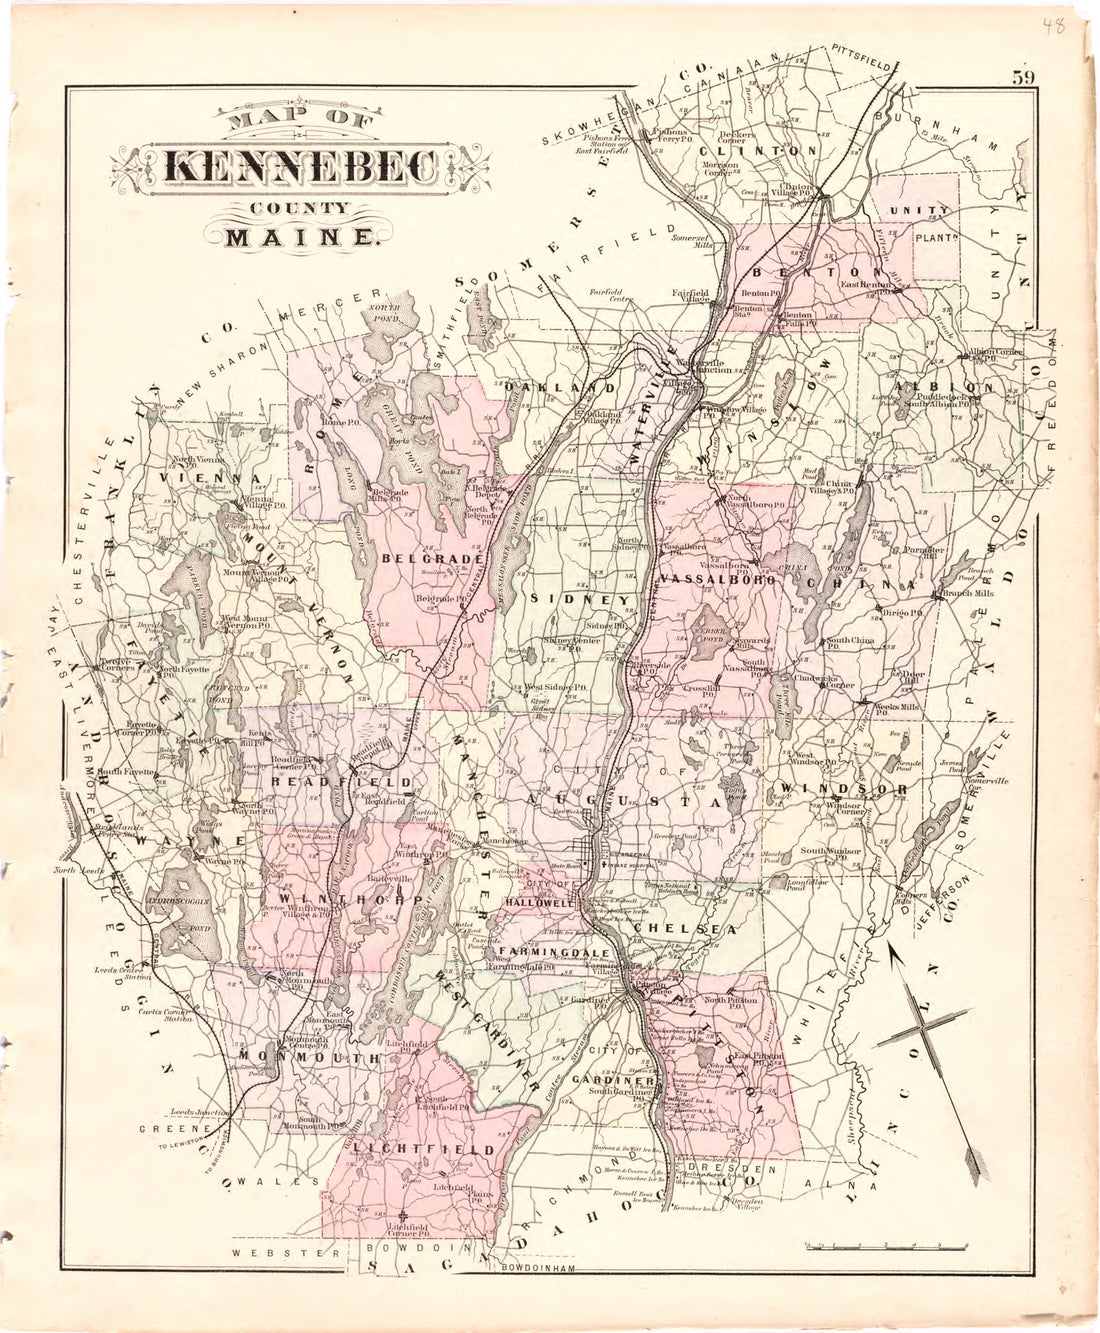 This hand drawn illustration (map) of Map of Kennebec County Maine from Colby&